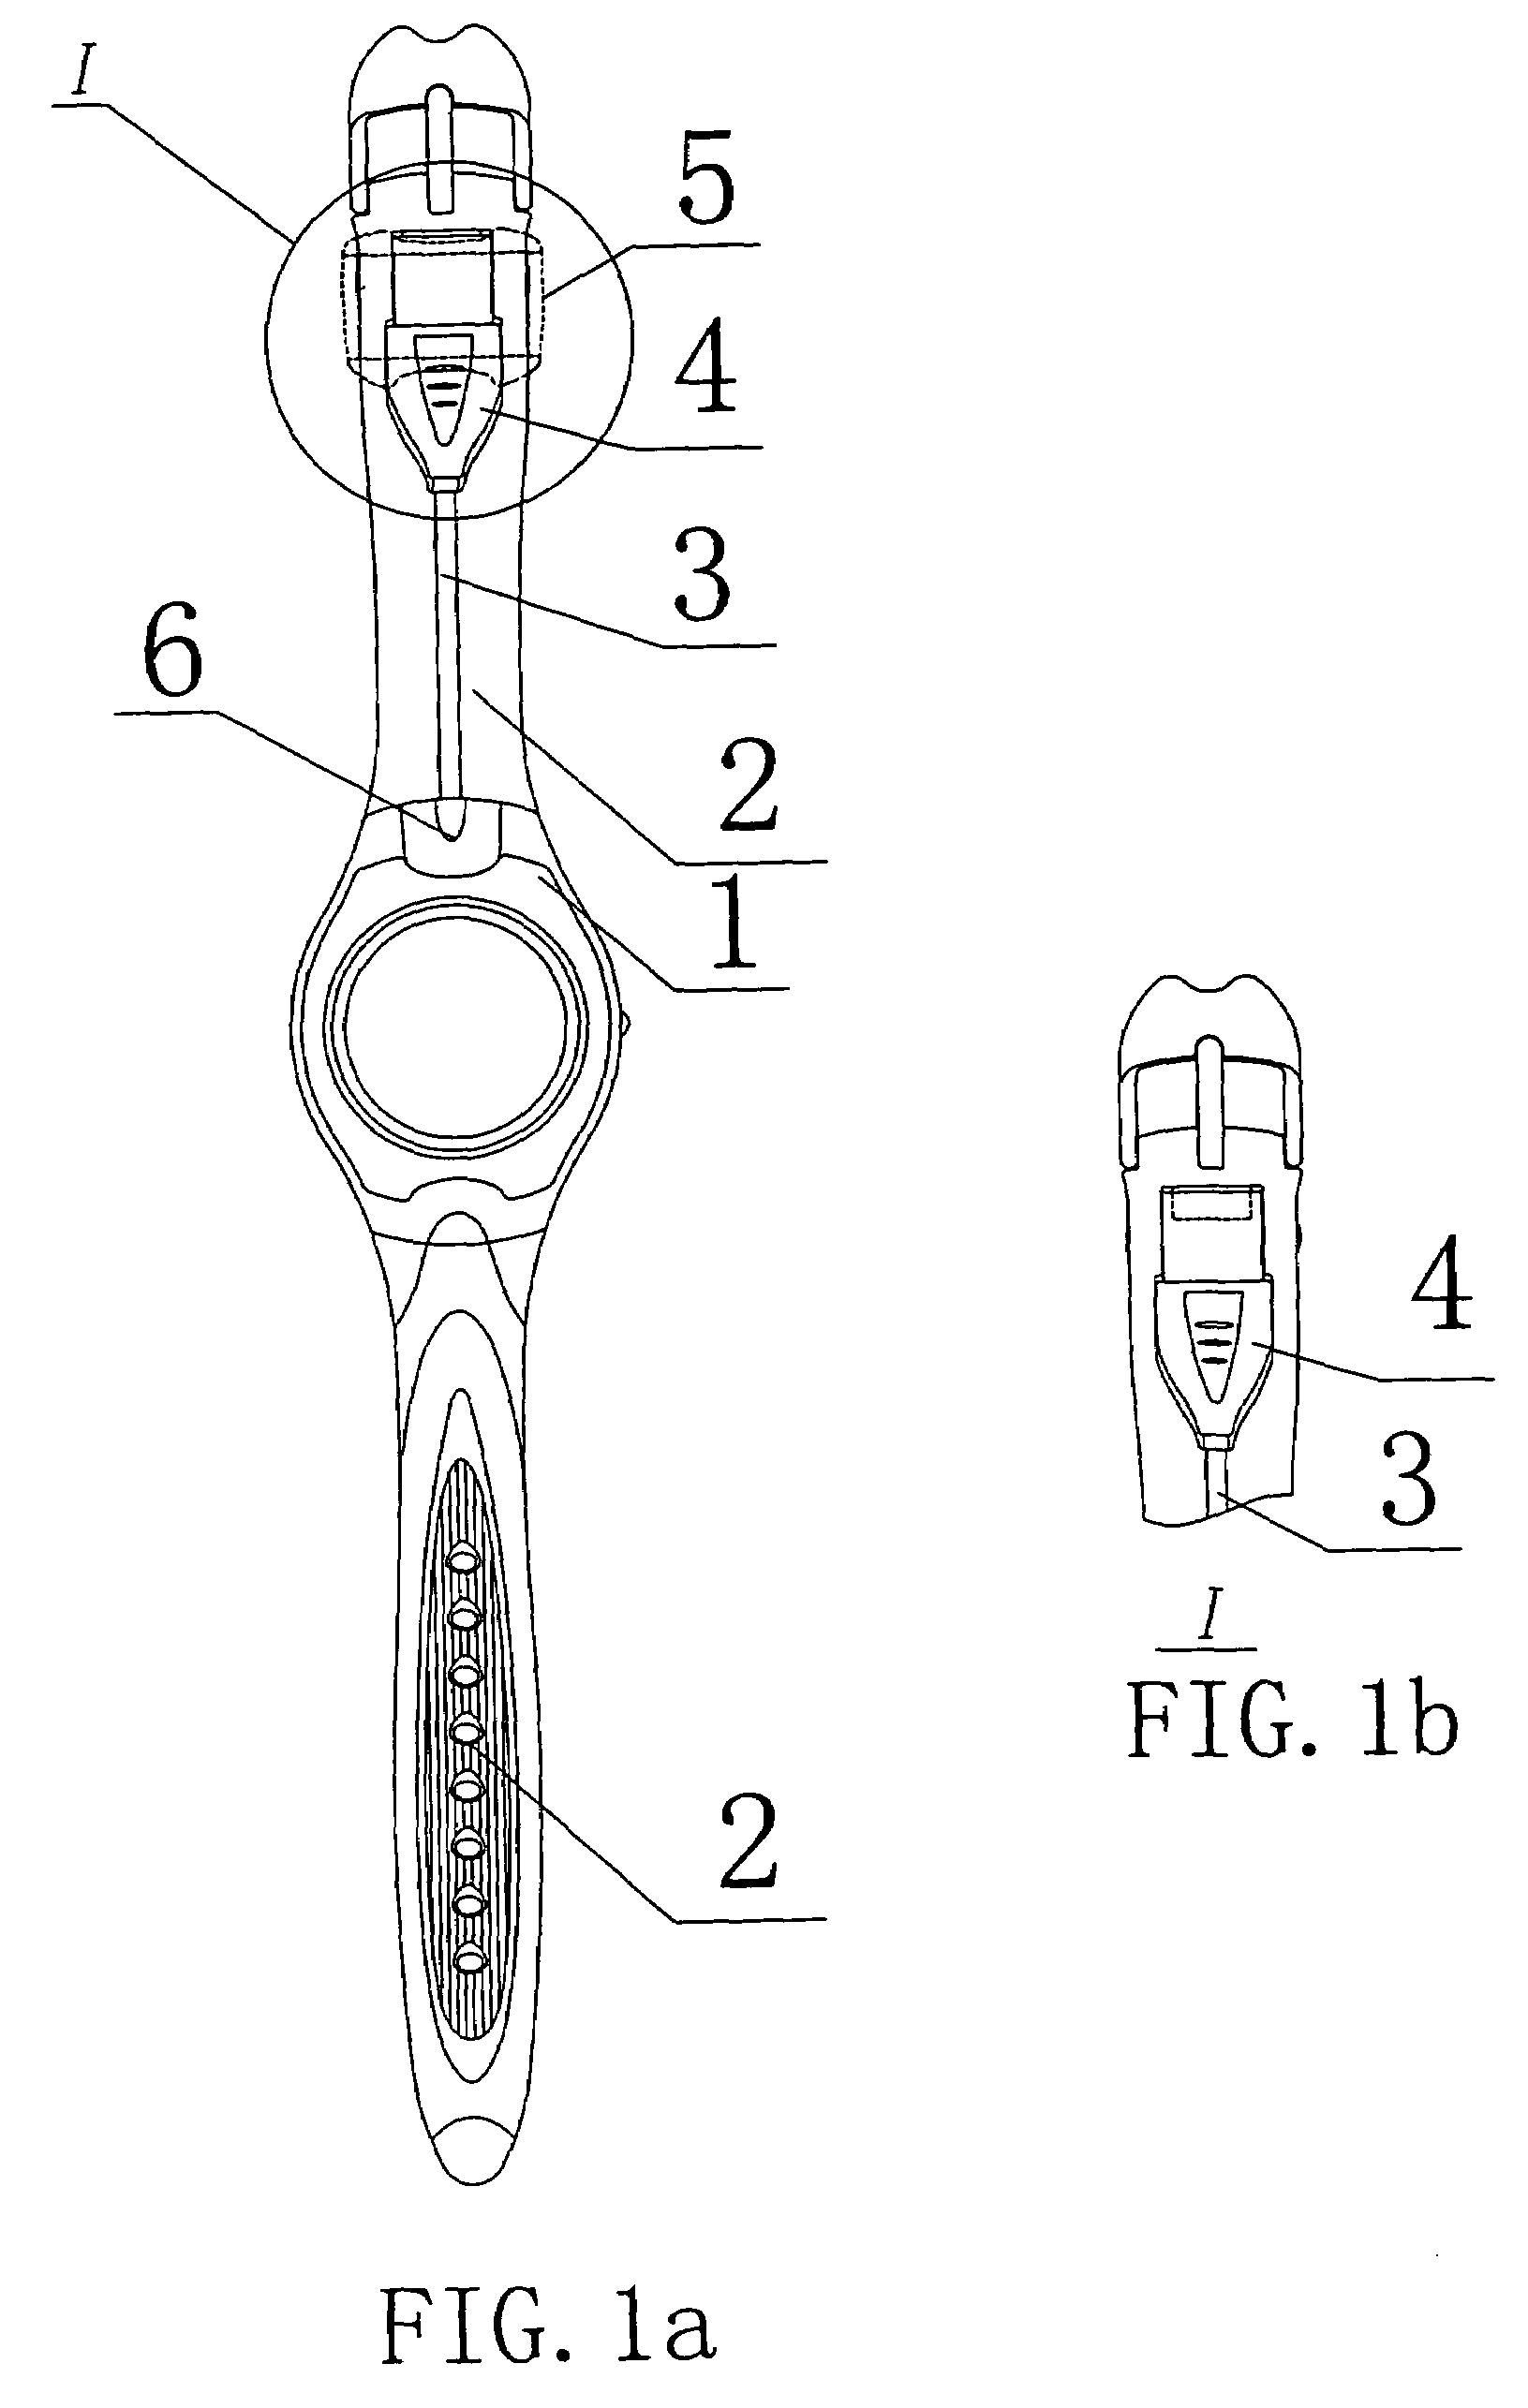 Wristwatch capable of storing and transmitting data